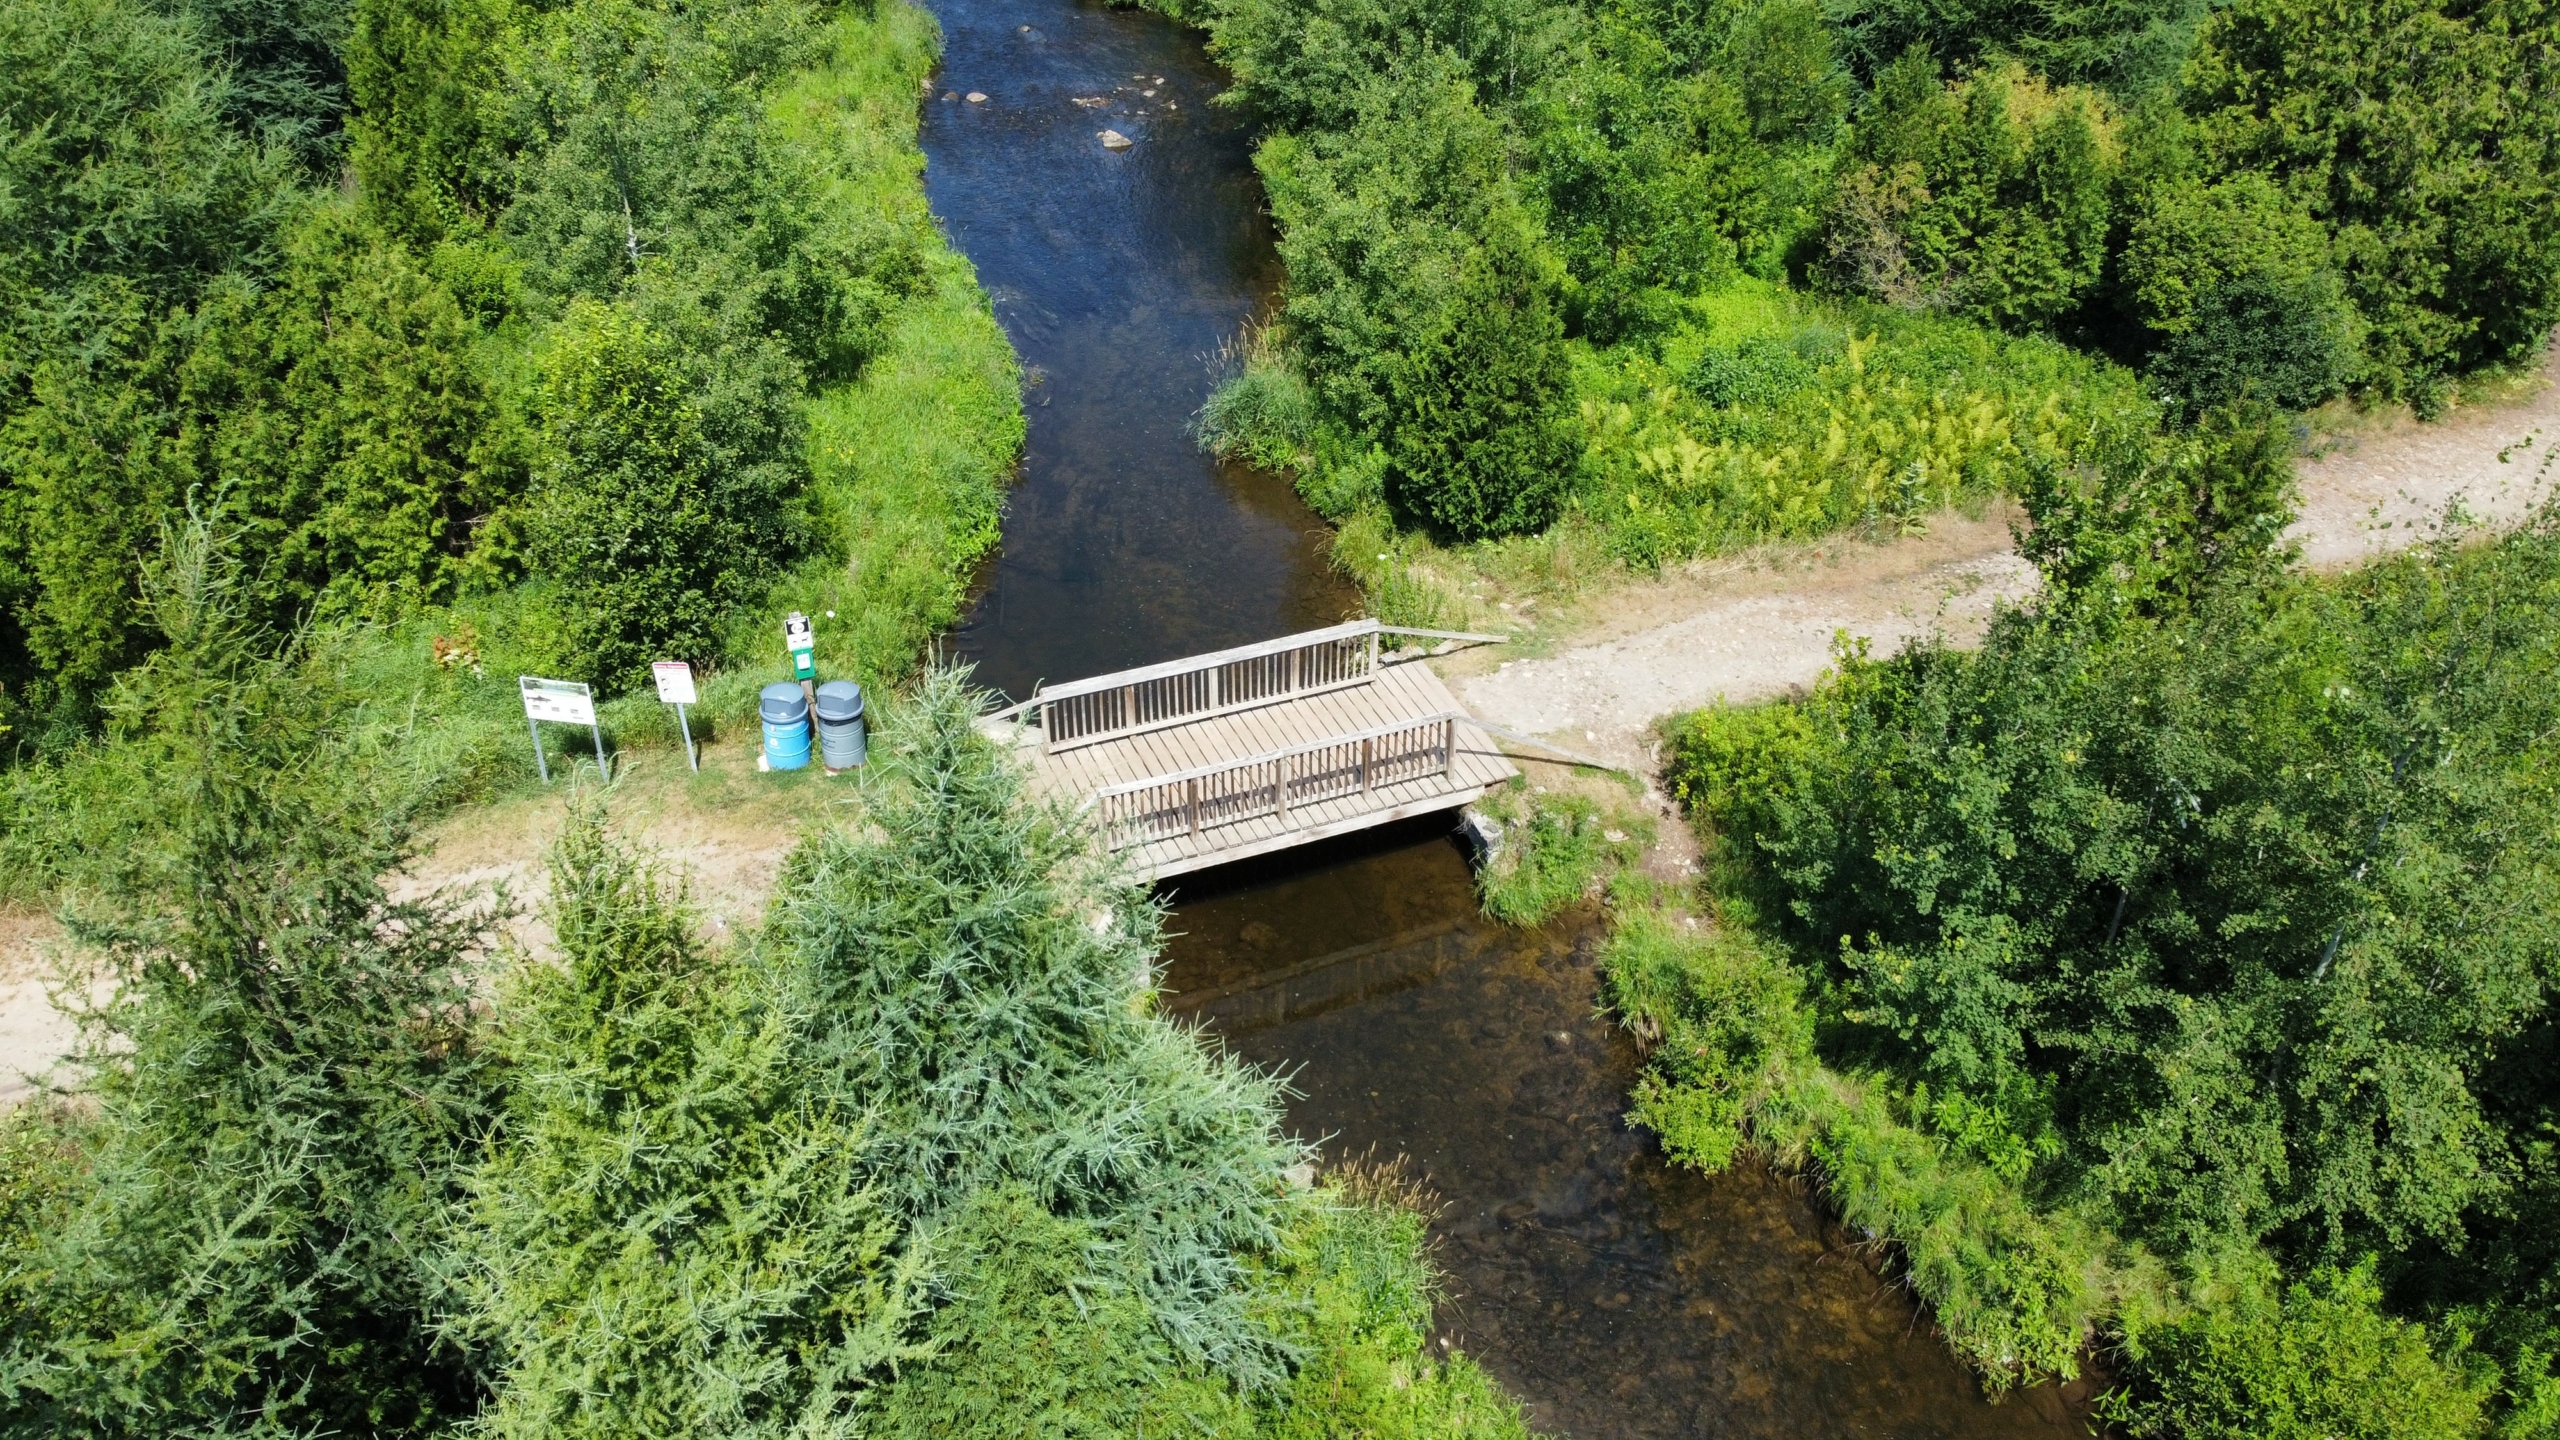 Aerial view of a wooden bridge over a river surrounded by forest.